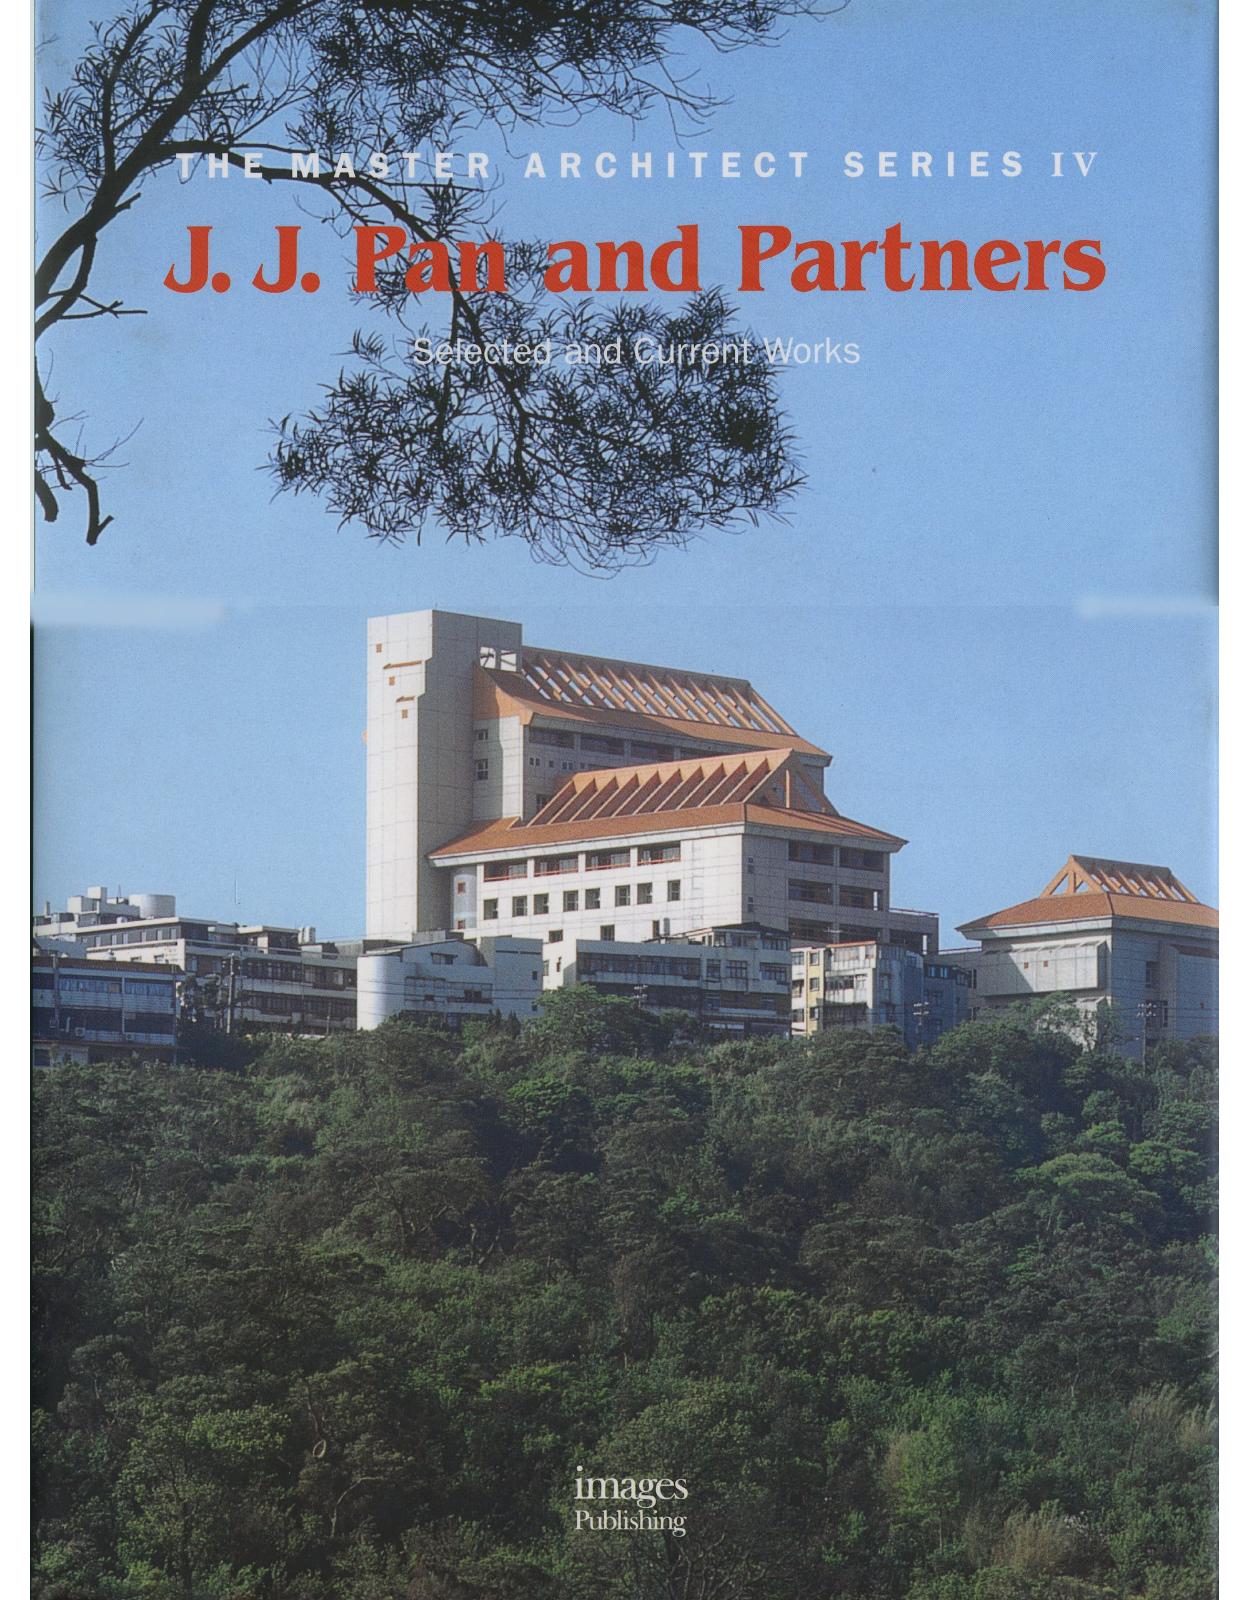 J.J. Pan: Selected and Current Works (Master Architect Series IV)